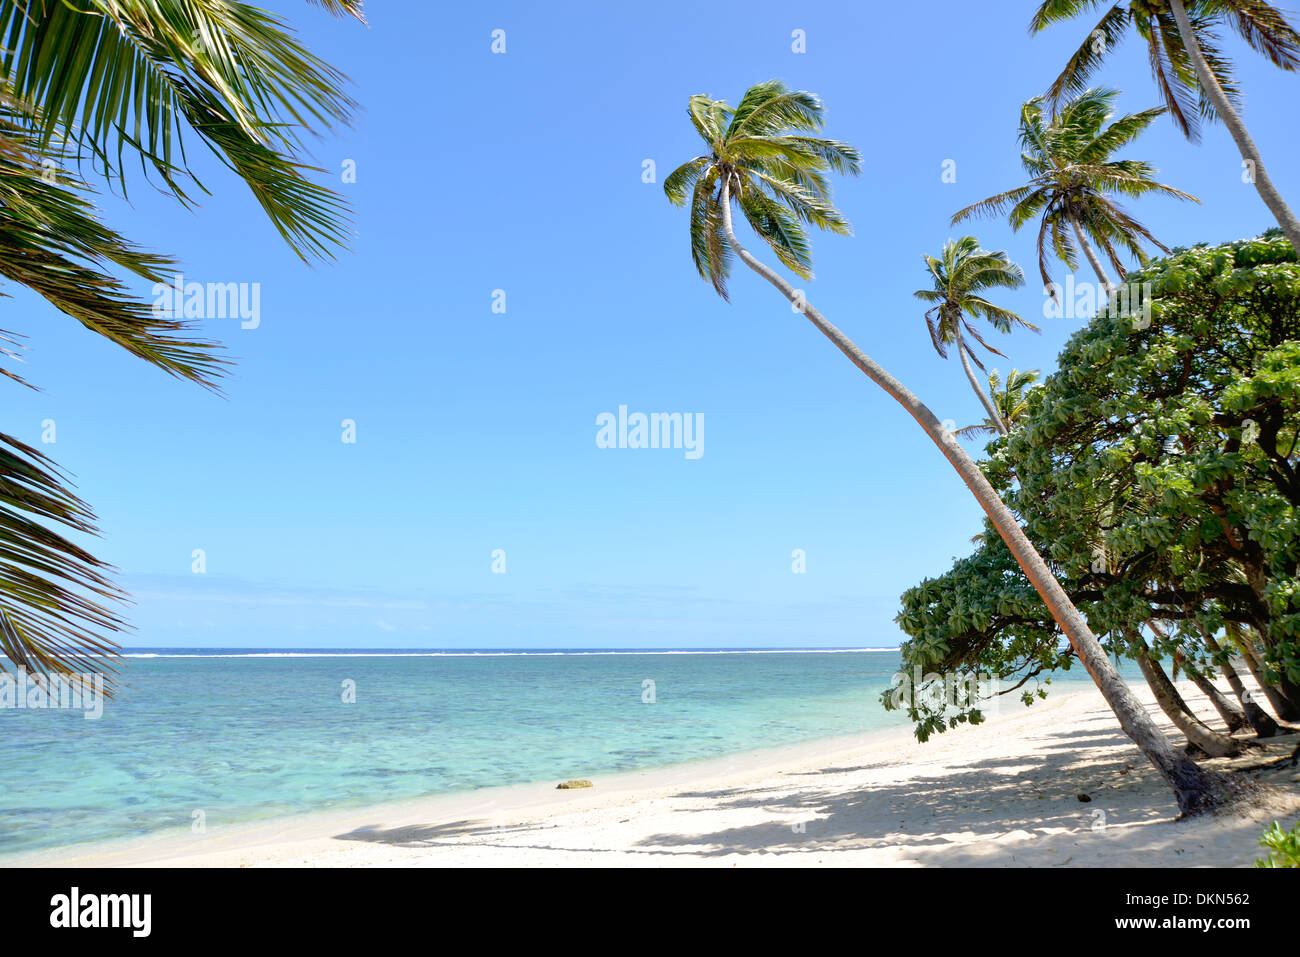 A deserted, white sand beach with overhanging palm trees along the ...